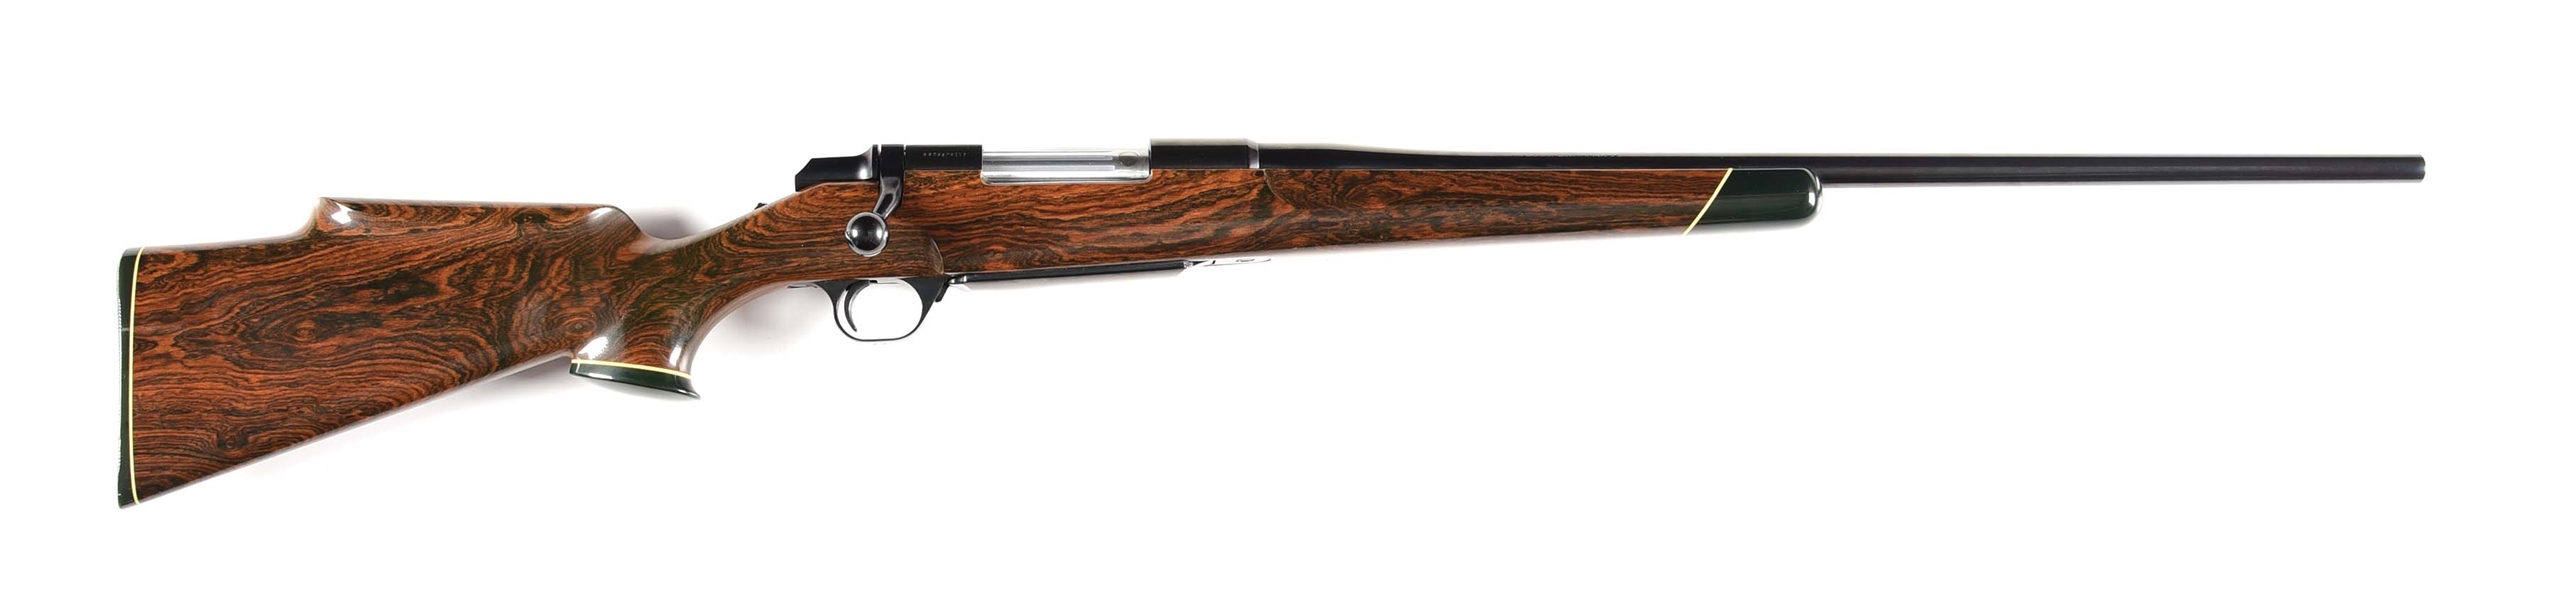 (M) BOCOTE STOCKED BROWNING BBR BOLT ACTION RIFLE.